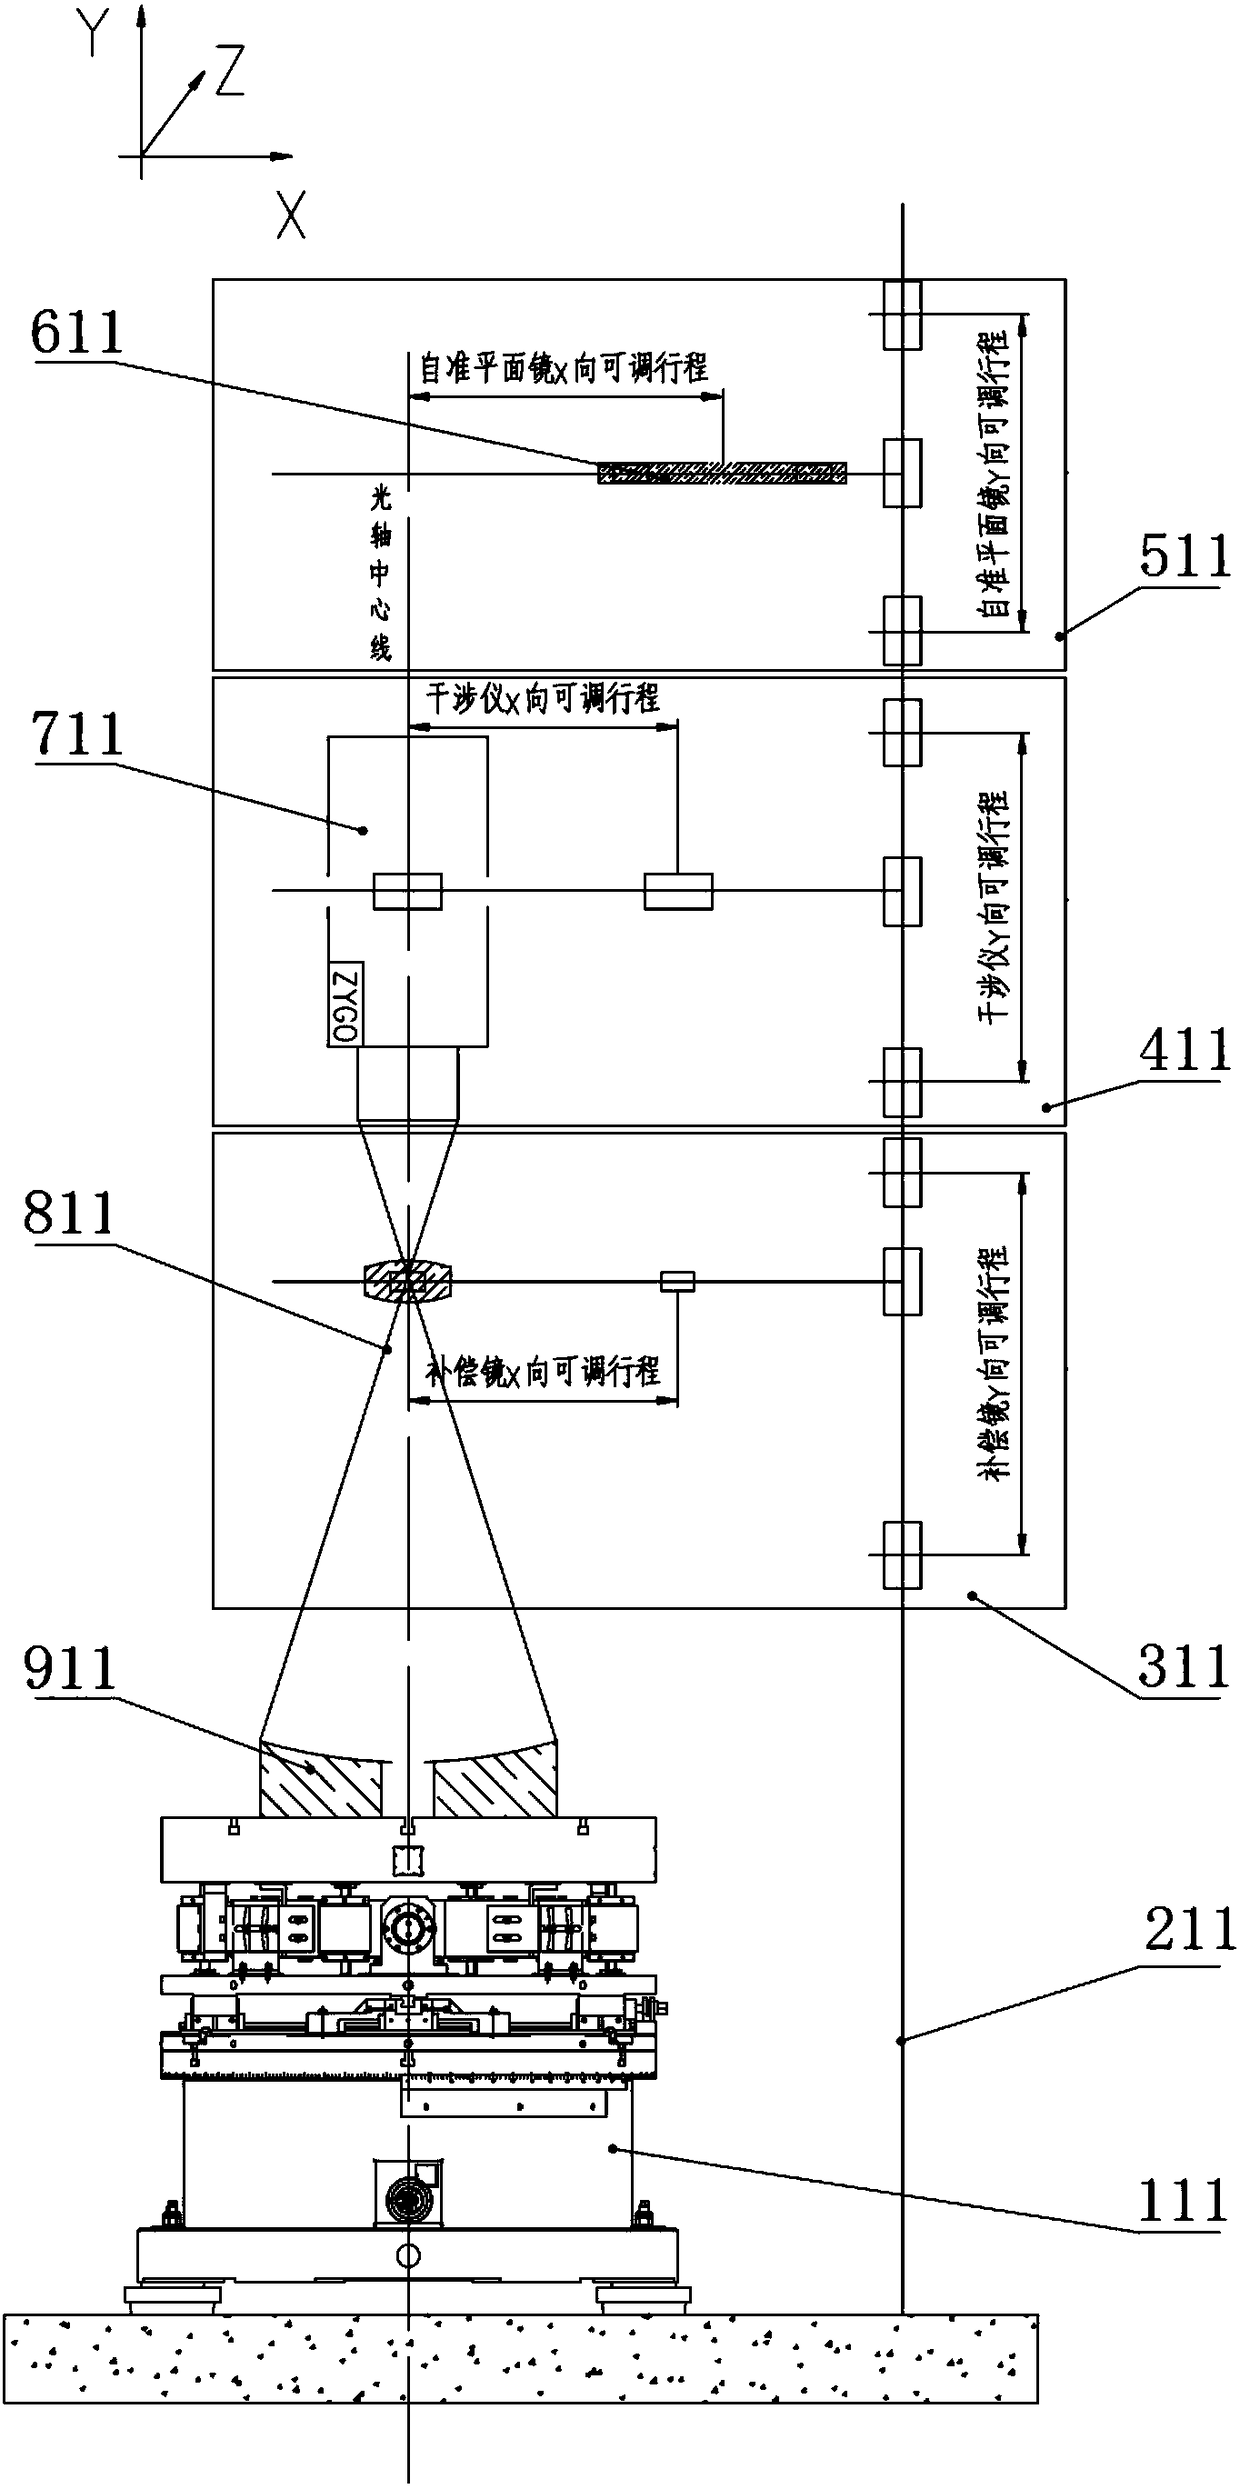 A vertical installation and inspection device and installation and inspection method for an optical system